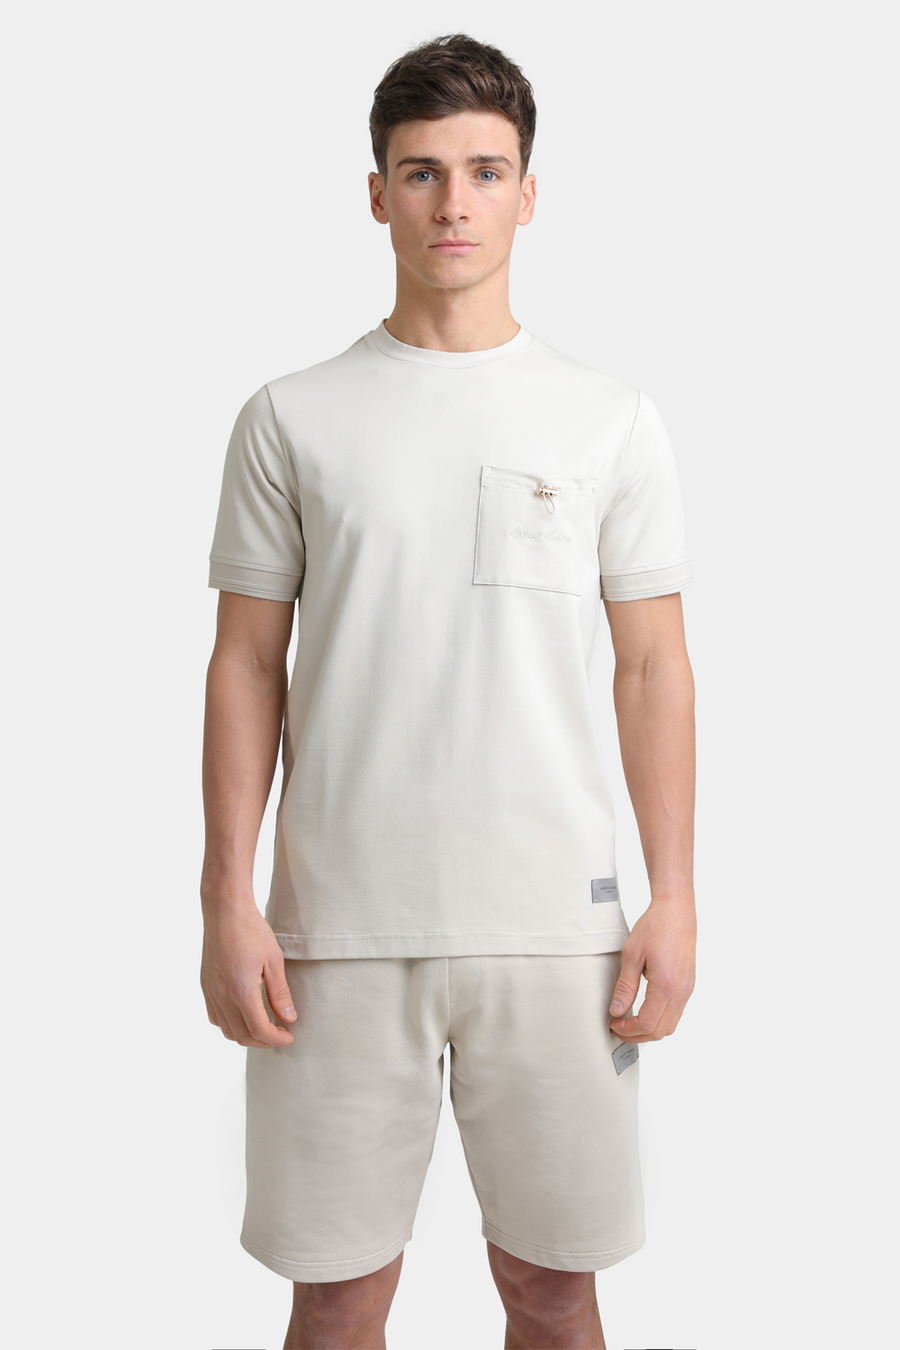 Buy the Android Homme Toggle Pocket T-Shirt in Sand at Intro. Spend £100 for free UK delivery. Official stockists. We ship worldwide.